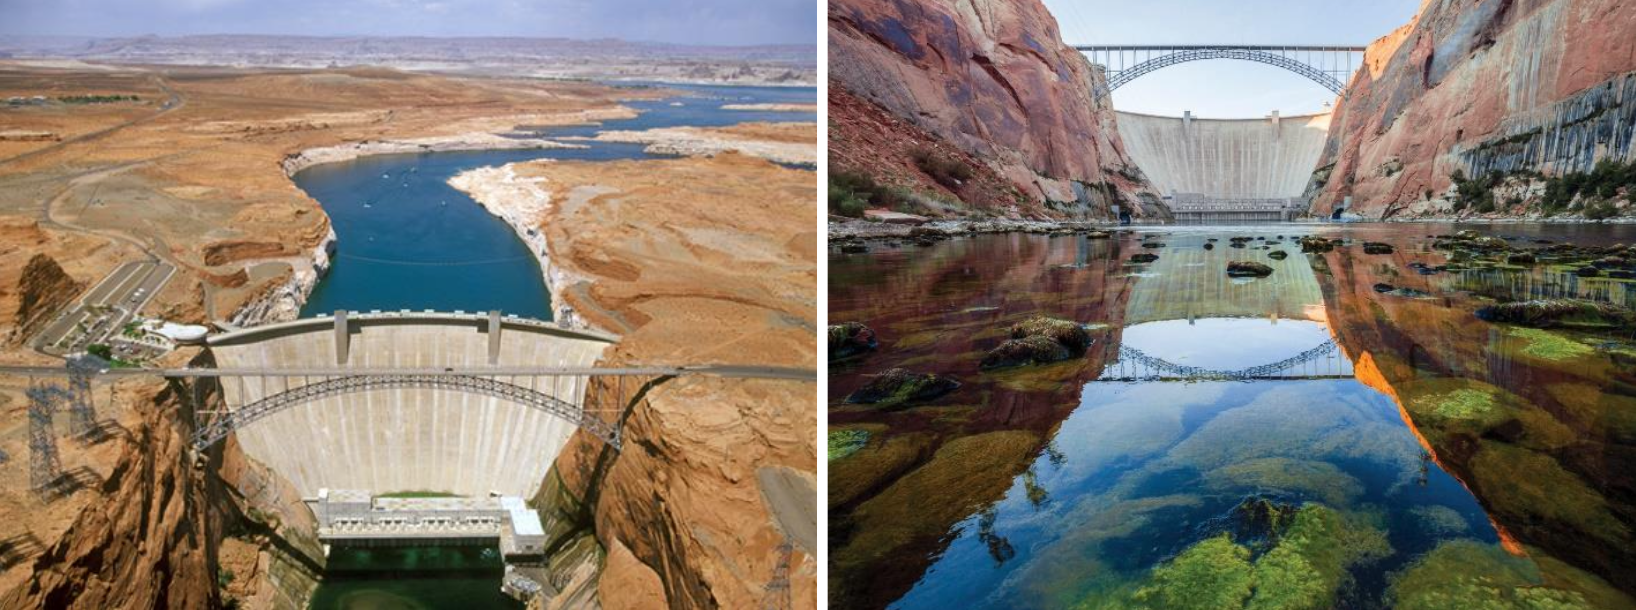 (Left) Glen Canyon Dam, north of Grand Canyon National Park (Photo source: USGS) (Right) Clear (sediment-free) water beneath Glen Canyon Dam (Photo source: NYTimes)